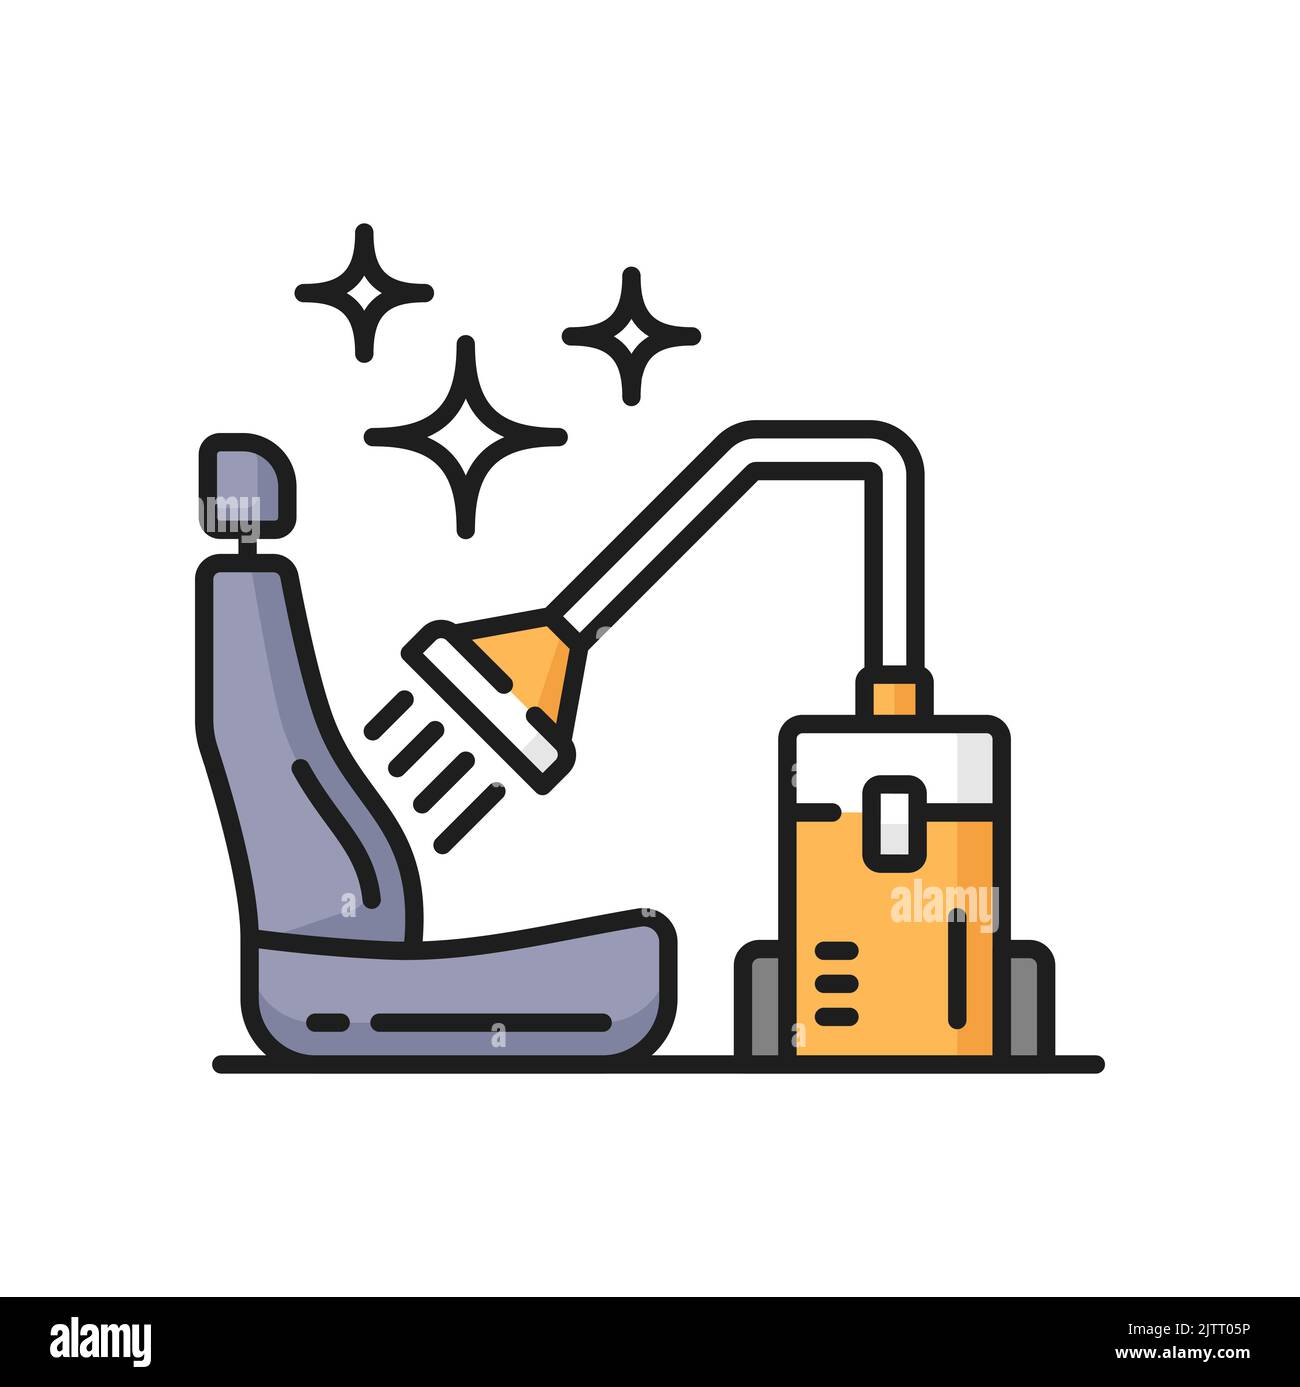 Car care icon, car wash and clean service, auto cleaner vector pictogram. Car care icon of vacuum cleaner and seat, car chair upholstery cleaning service, automotive washer station or hand washing Stock Vector